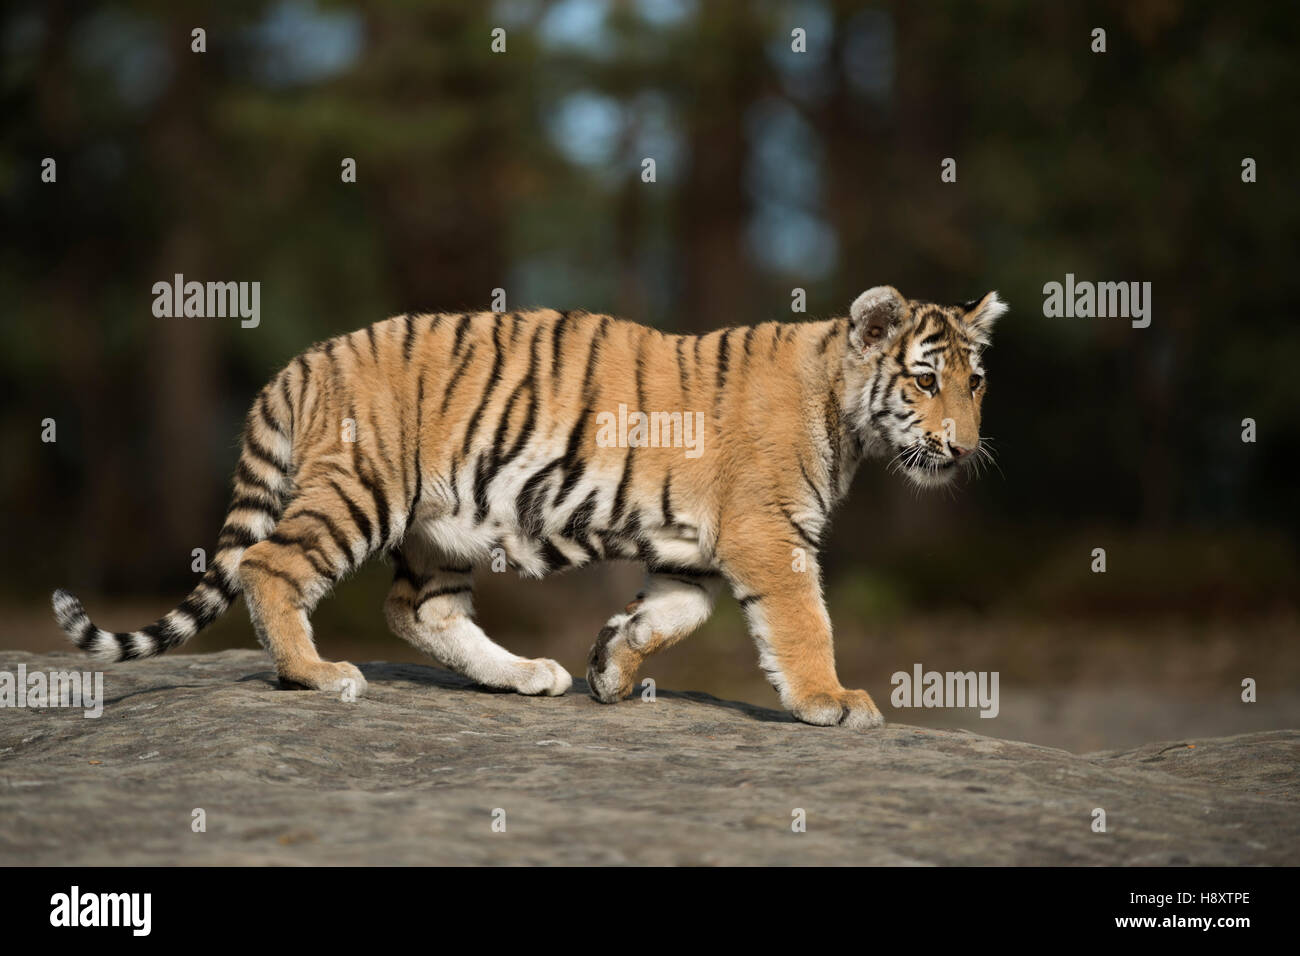 Royal Bengal Tiger ( Panthera tigris ), walking along the edge of a forest, full side view, young animal, soft light. Stock Photo